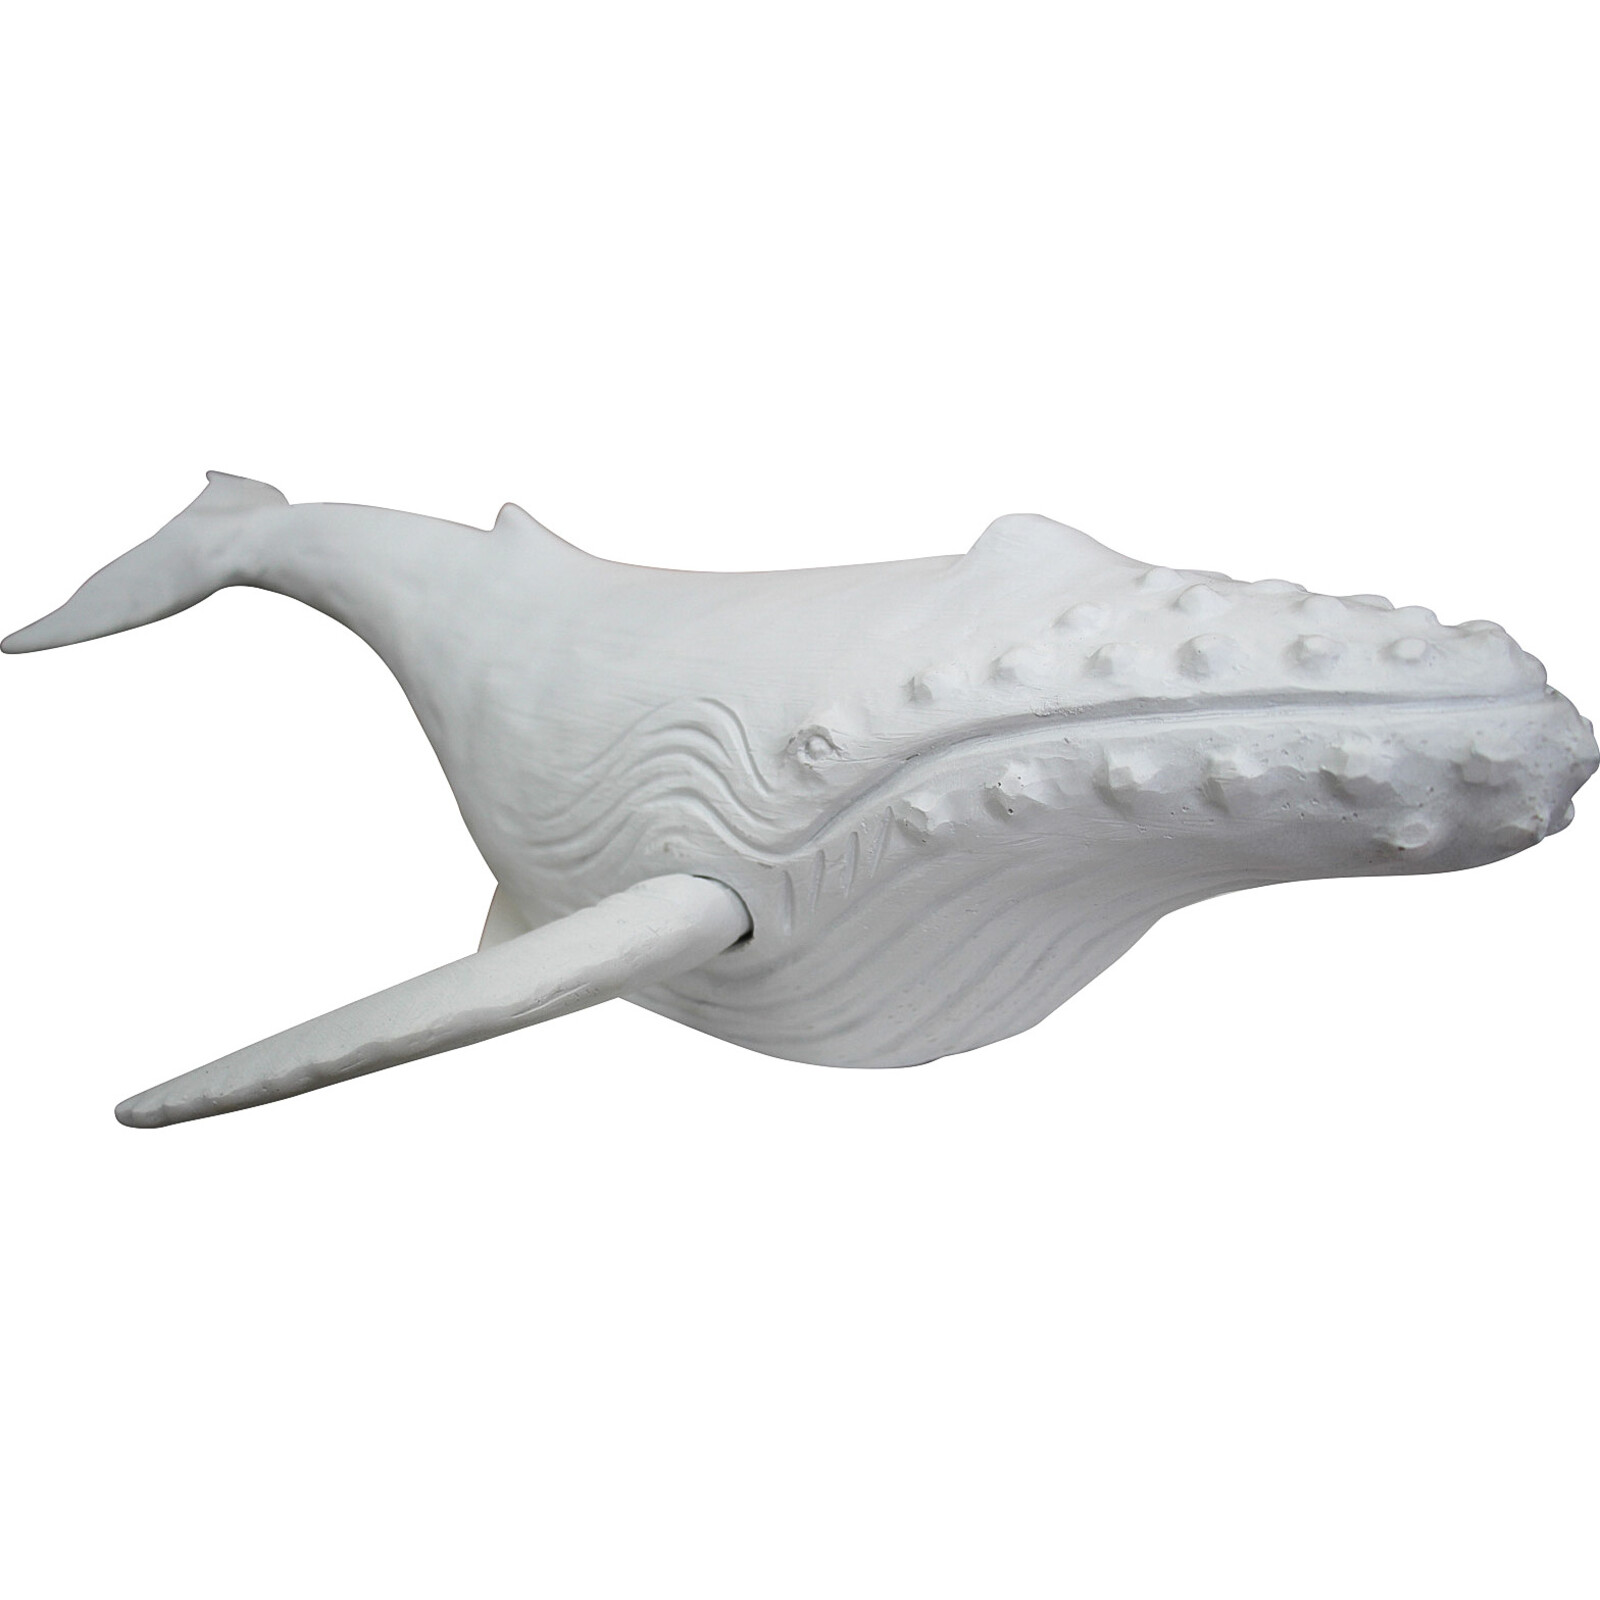 Majestic Whale White Med